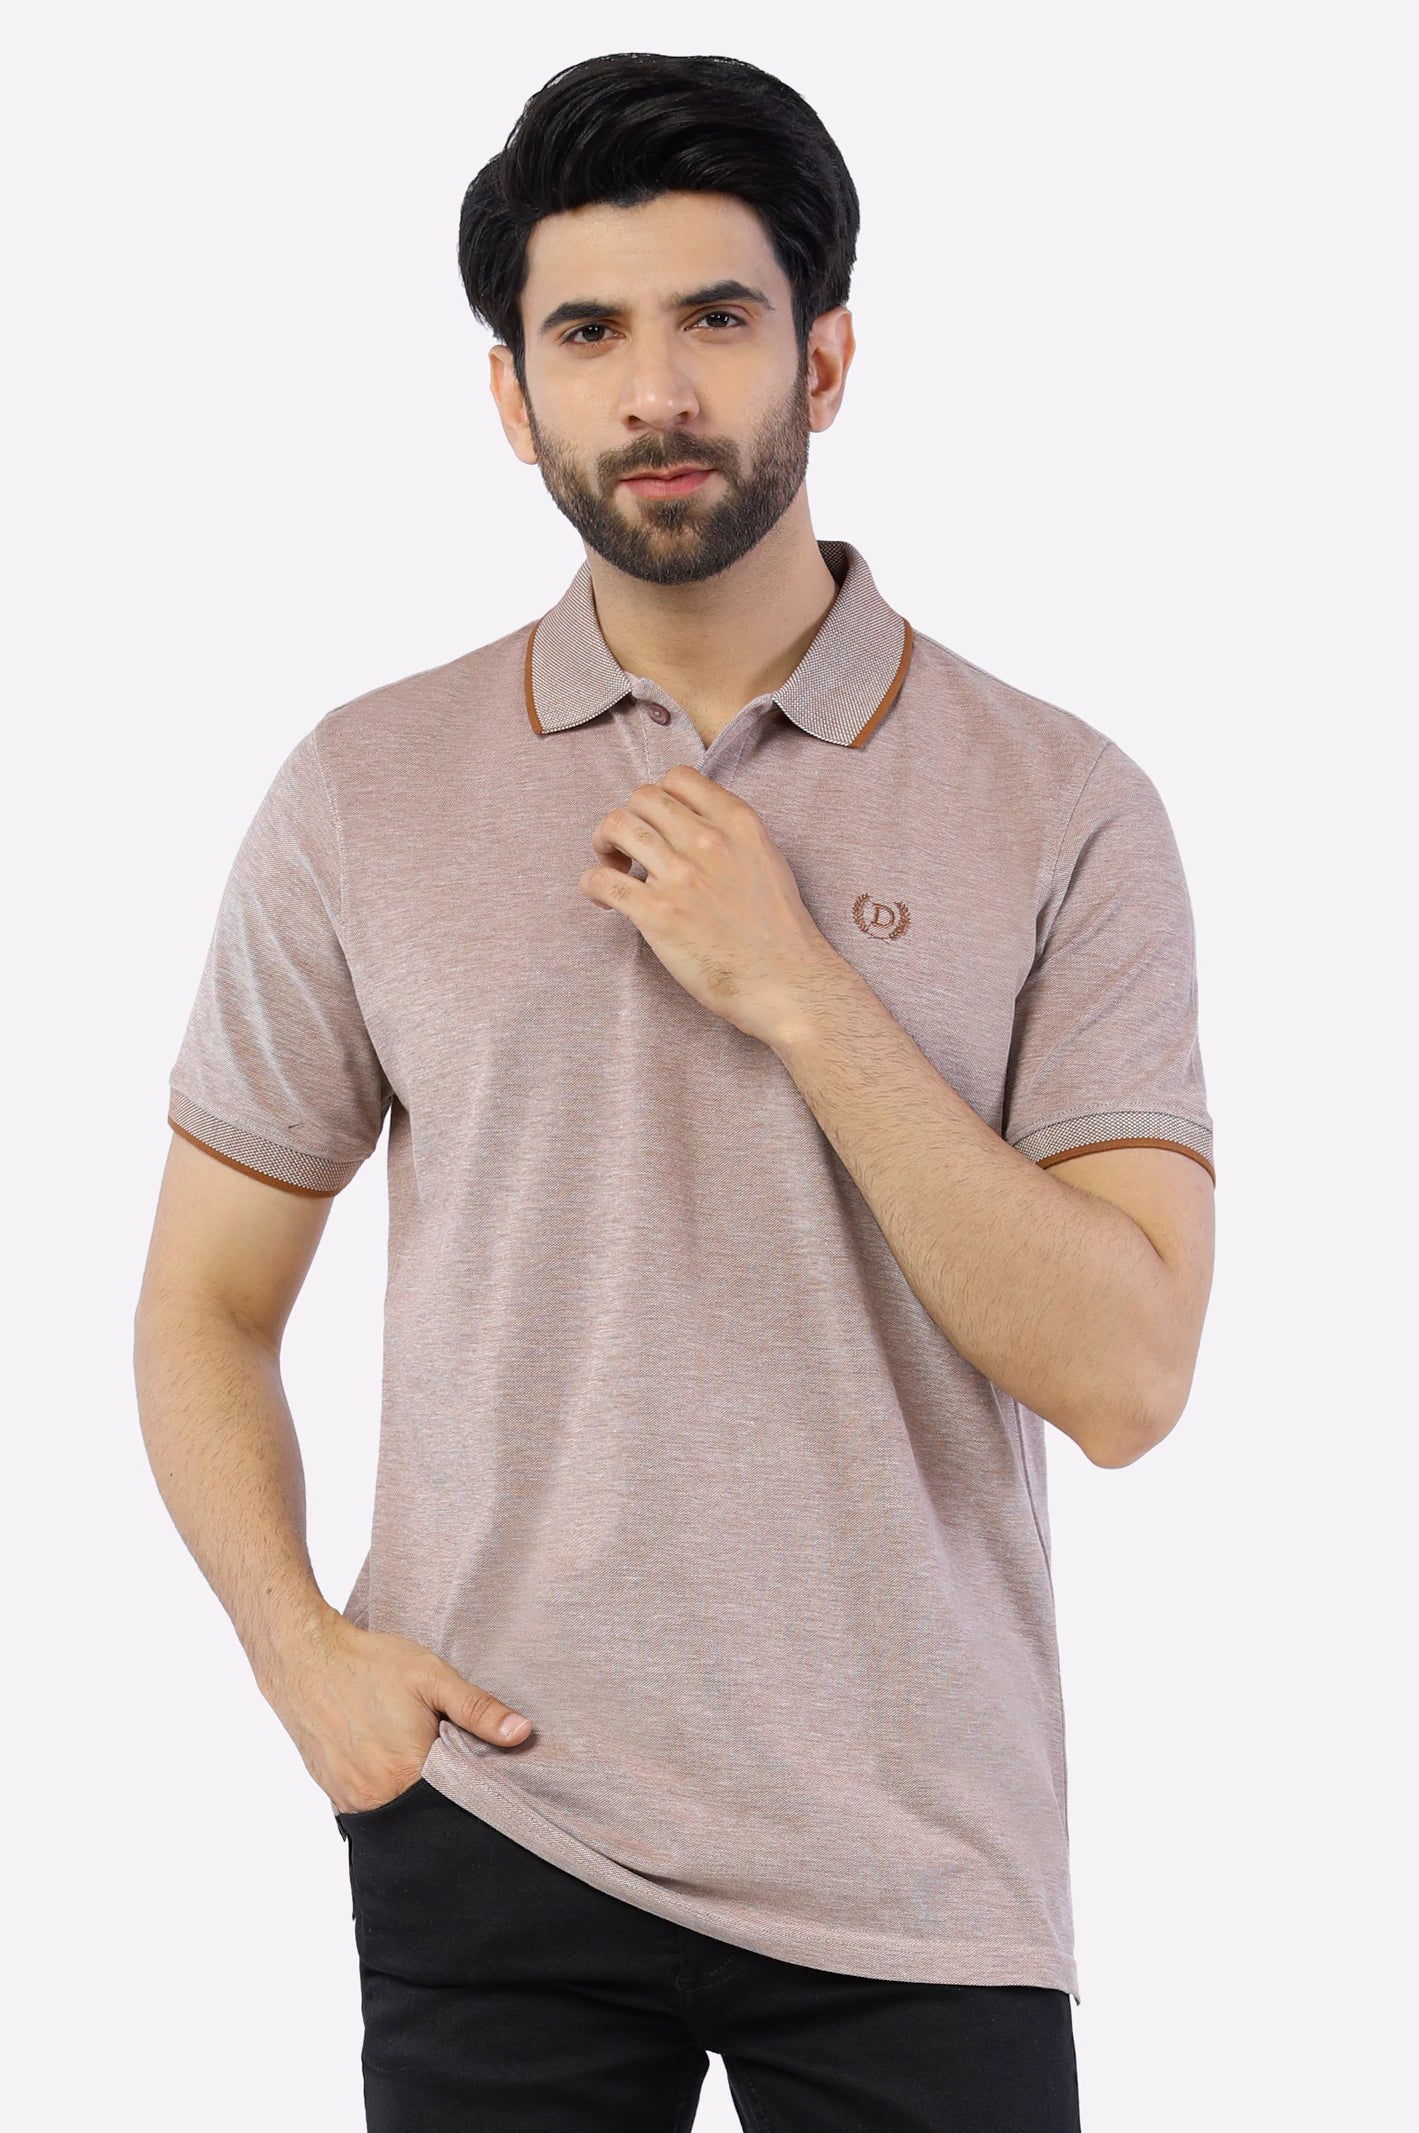 Brown Jacquard Collar Polo From Diners